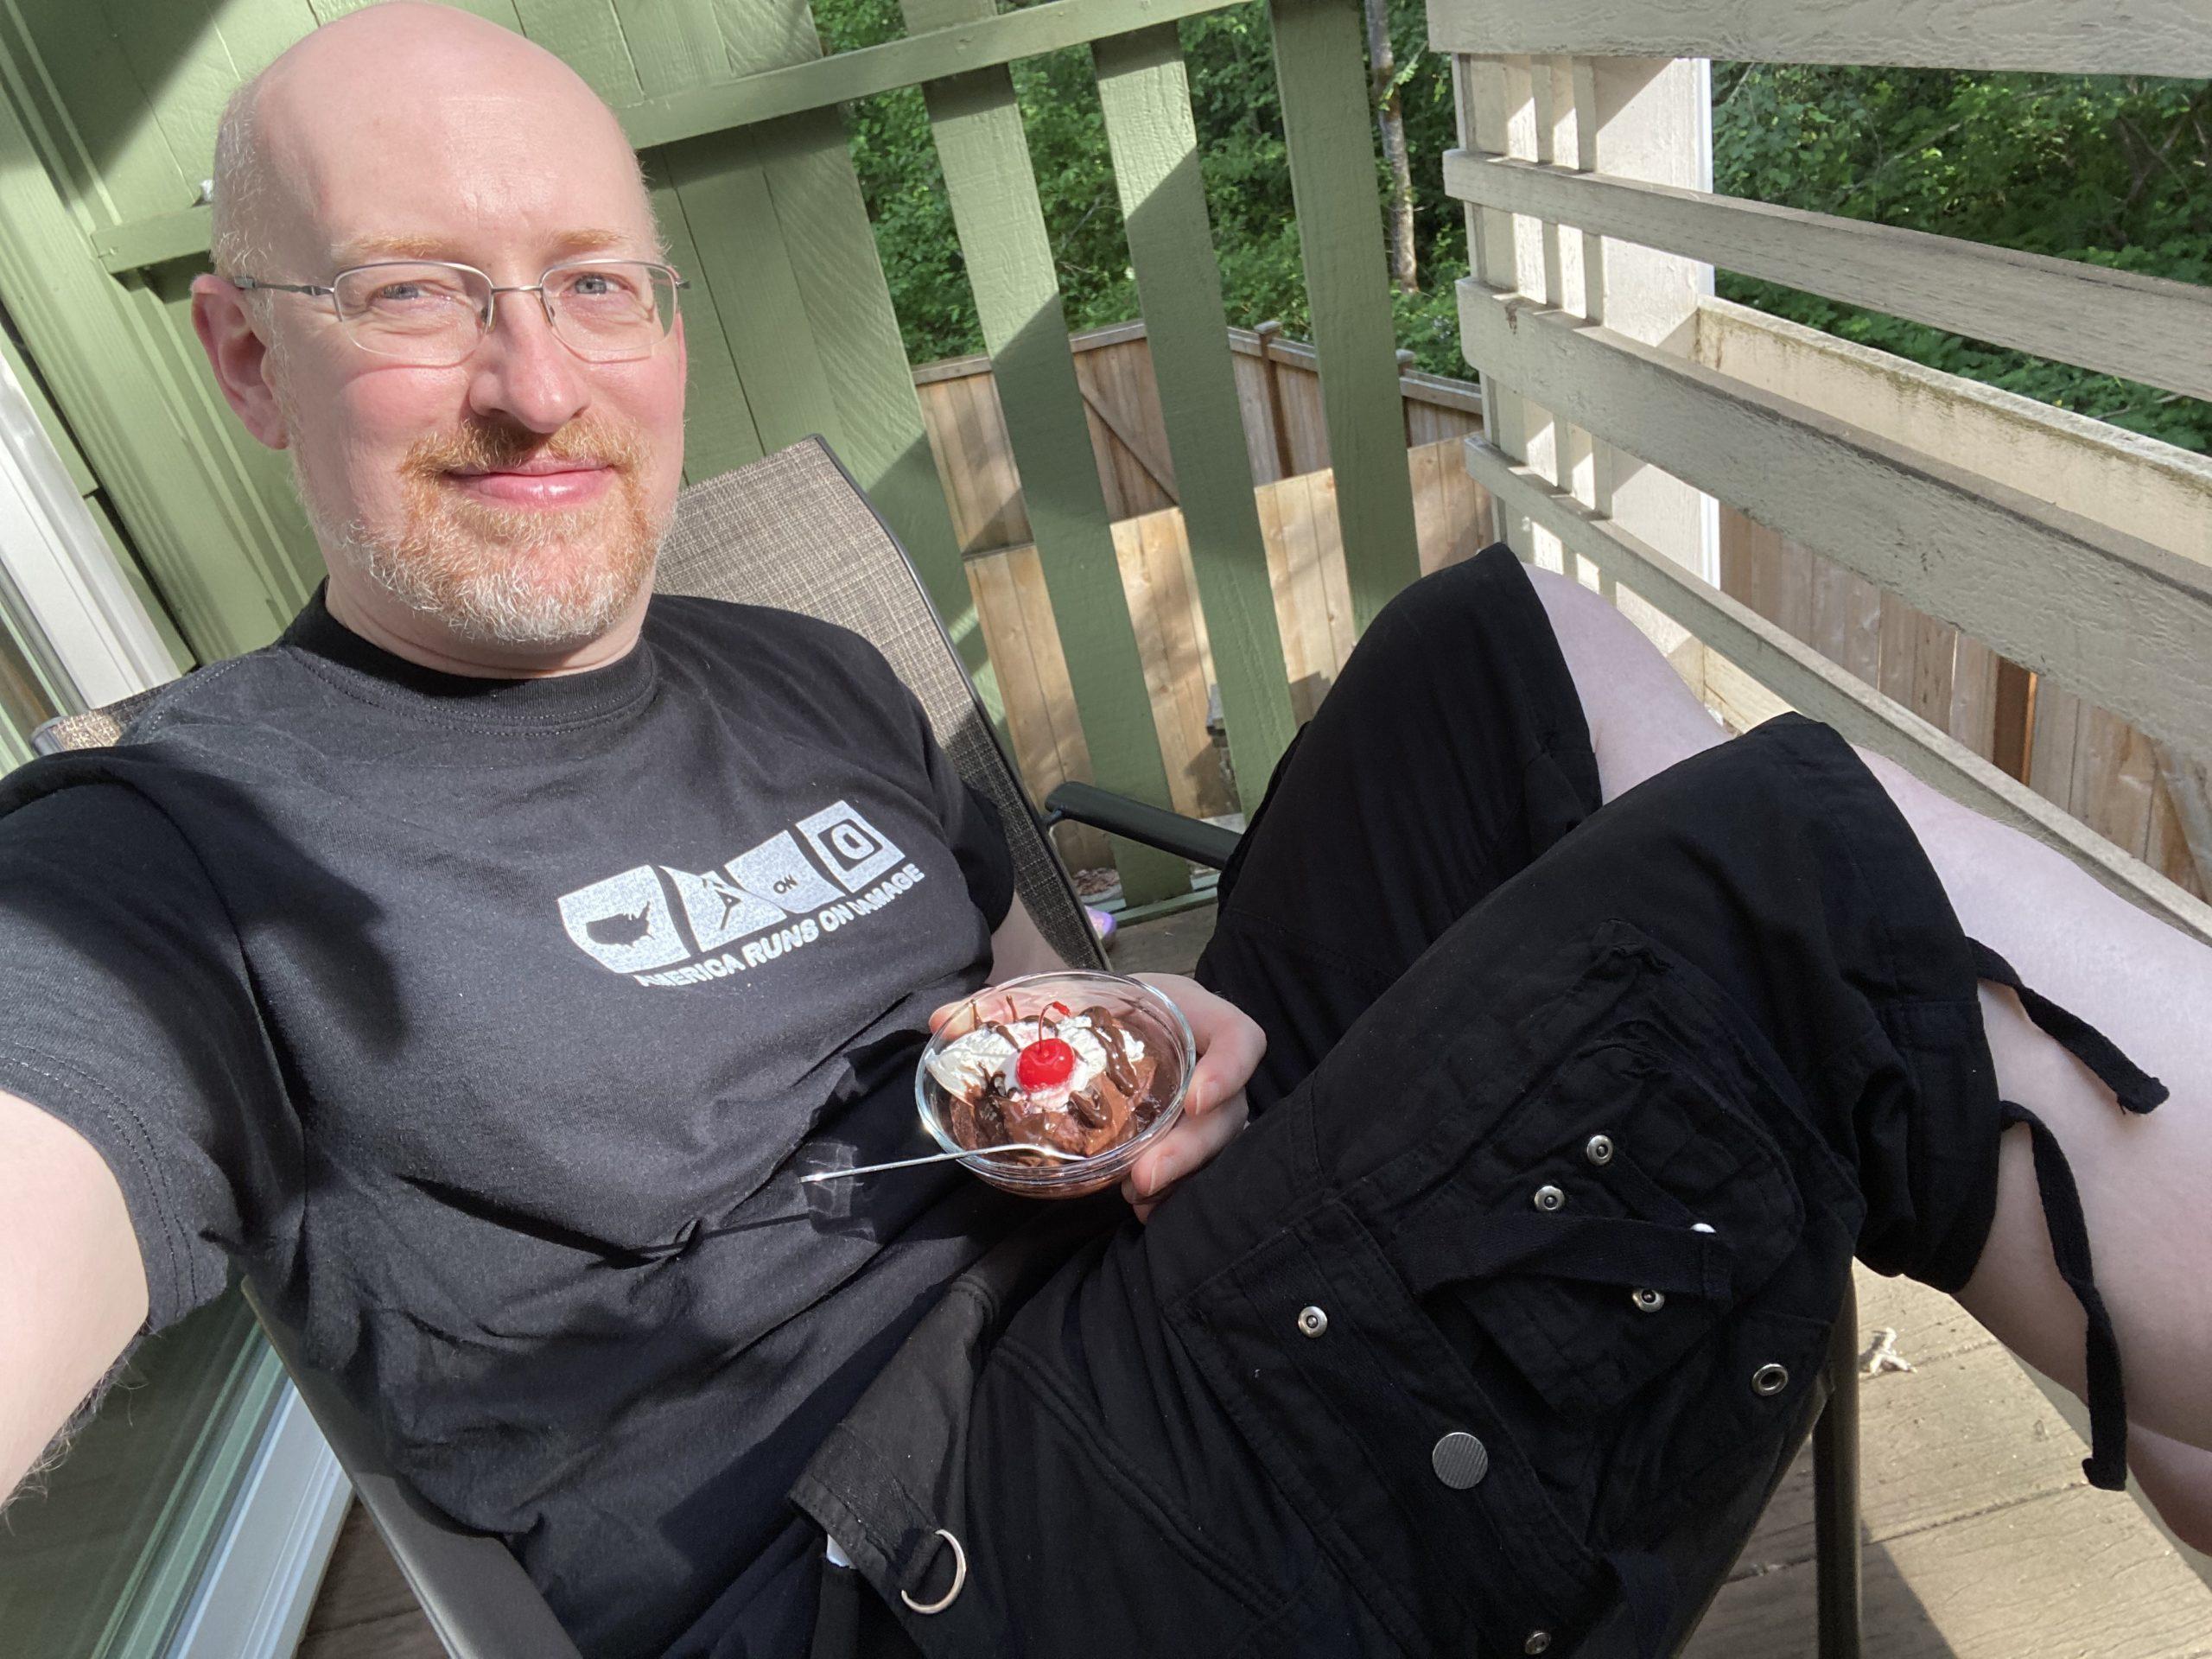 Me sitting on our back deck, wearing black cargo shorts and t-shirt, holding a bowl of chocolate pudding with whipped cream and a maraschino cherry.